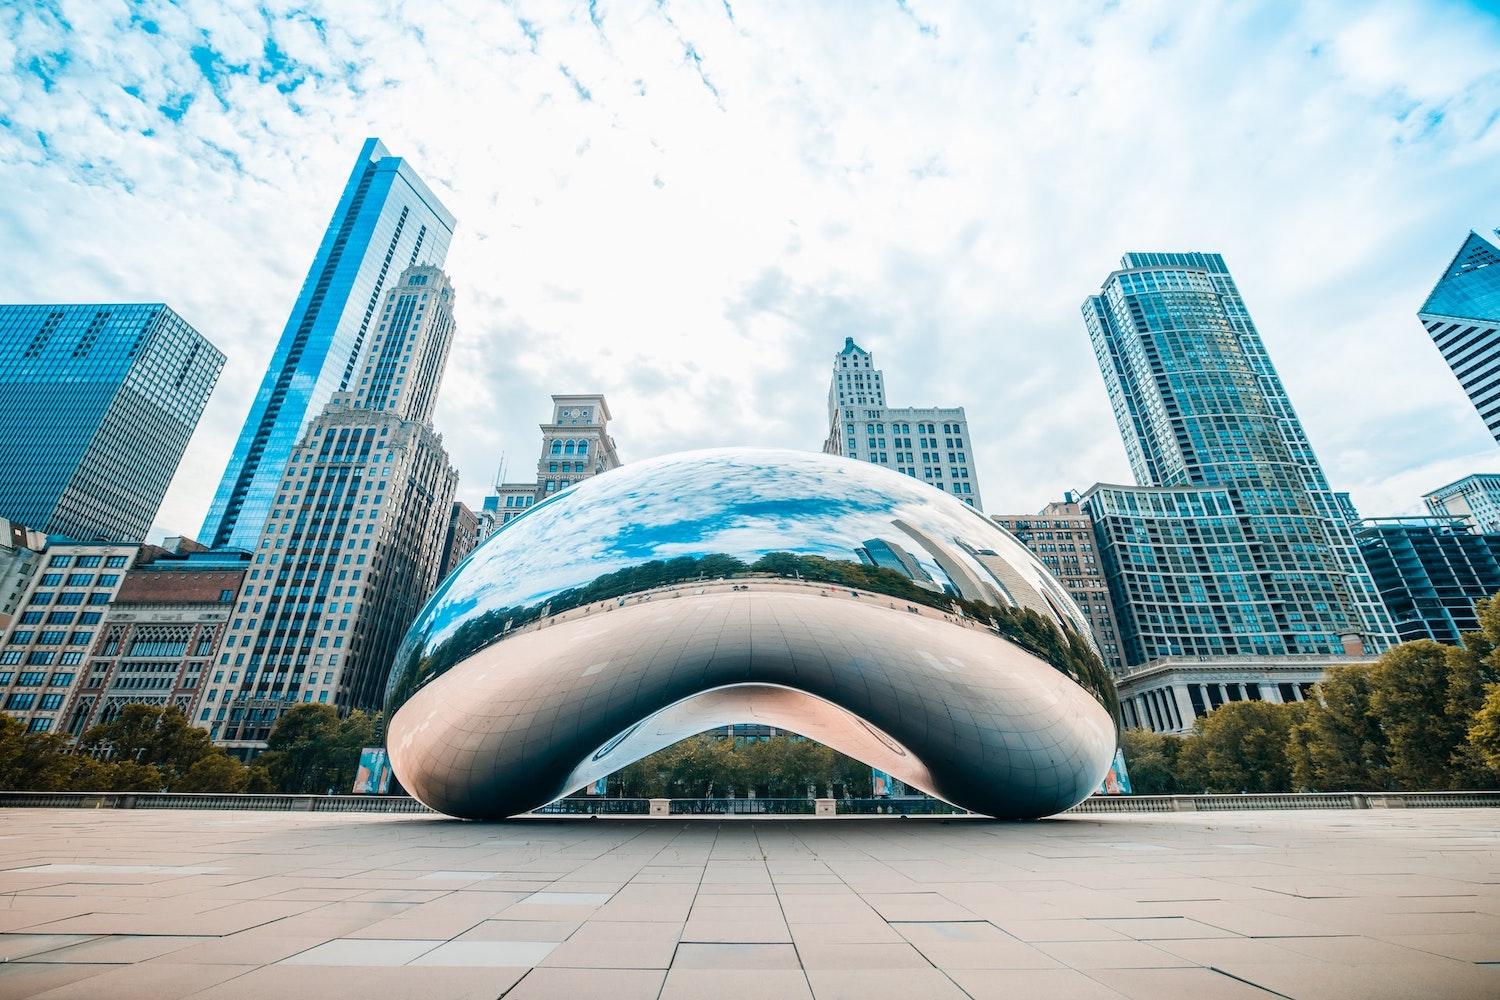 The Bean Cloud Gate sculpture Chicago - Chicago testing universal basic income